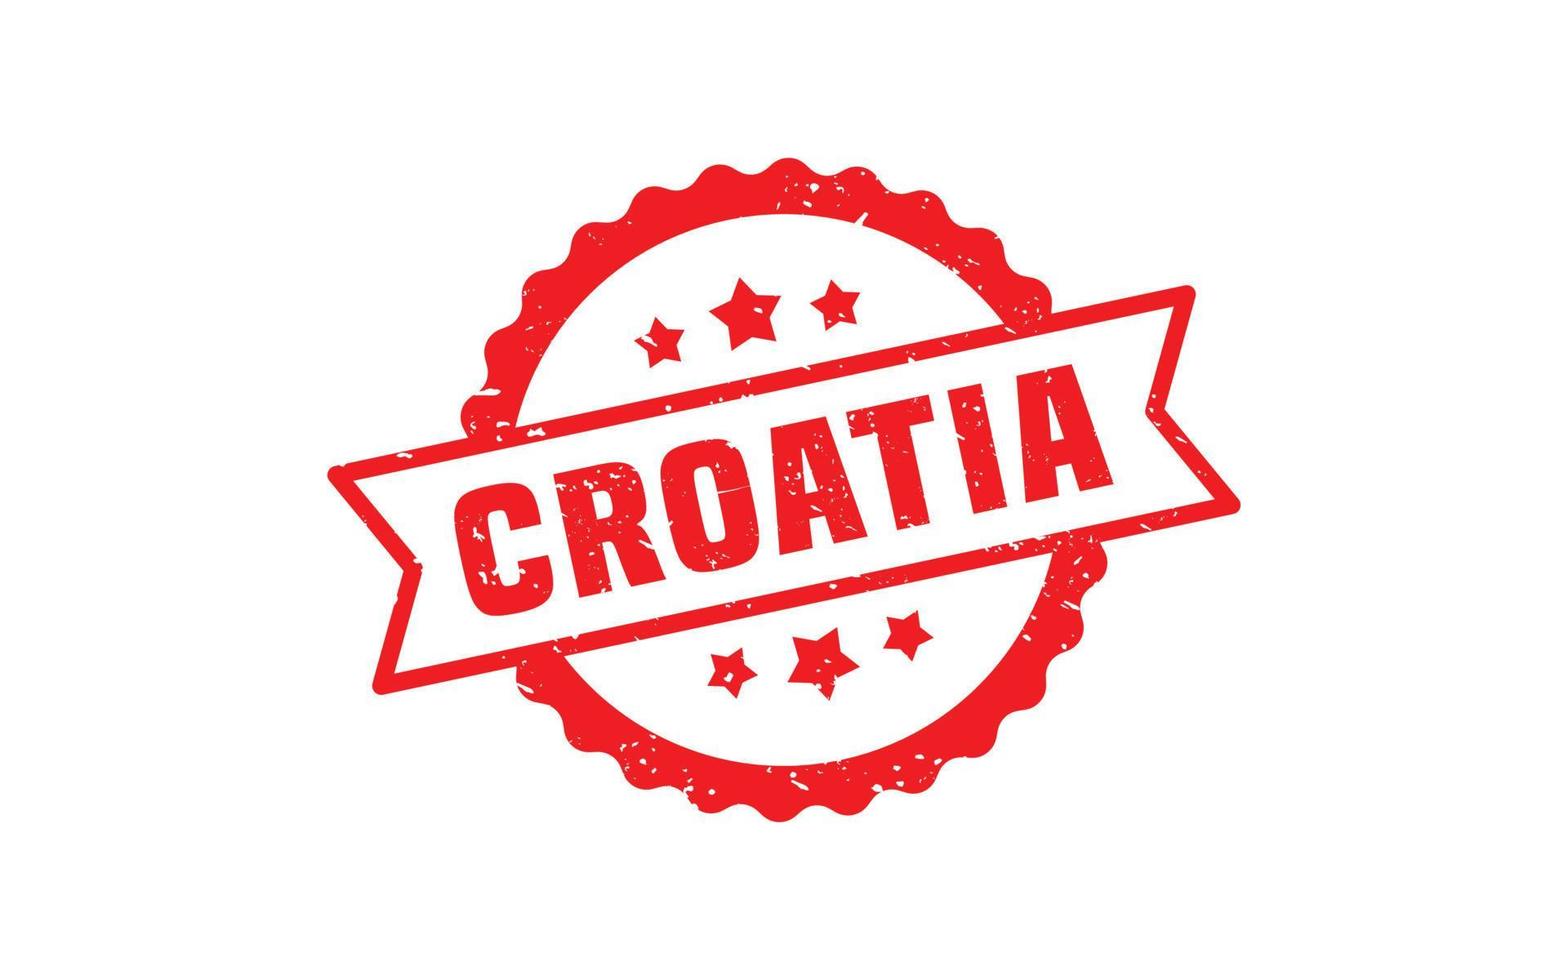 CROATIA stamp rubber with grunge style on white background vector